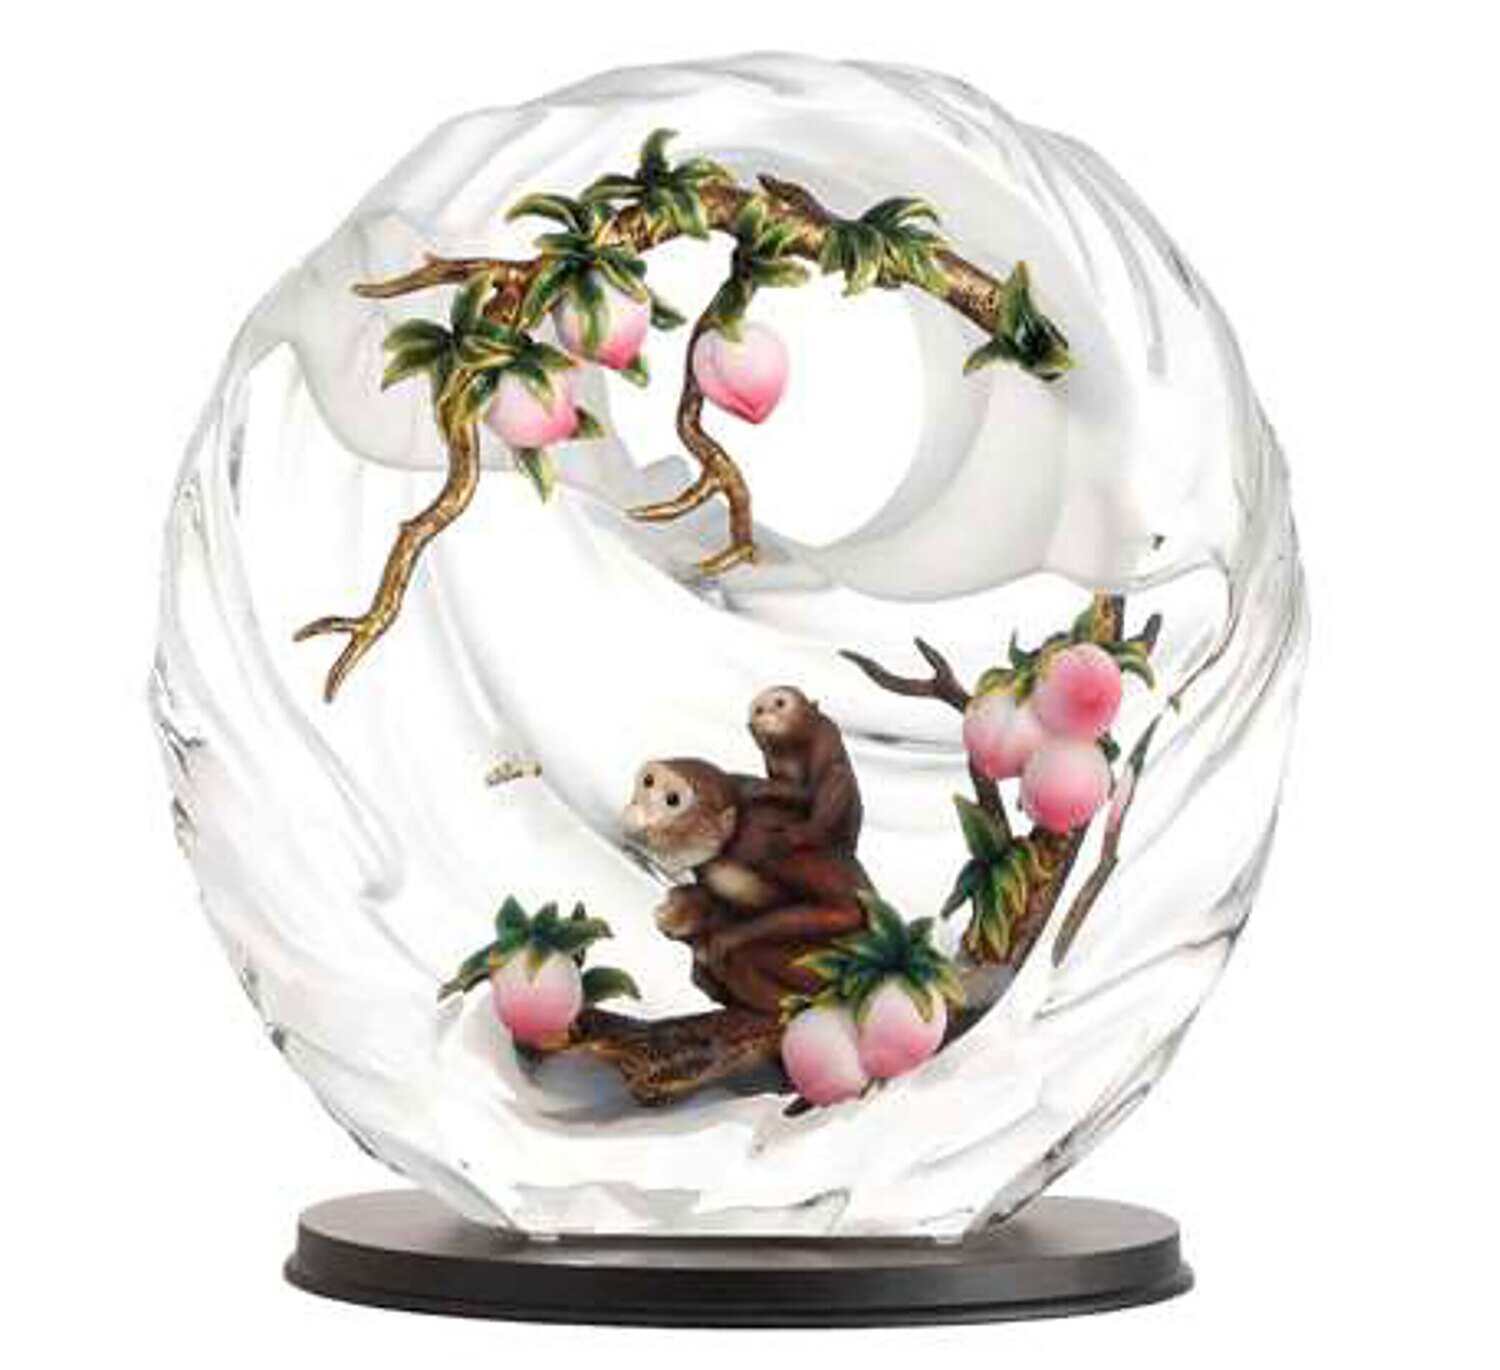 Franz Porcelain Lucite Three Monkeys Sitting In Peach Figurine with Wooden Base Limited Editon of 88Pcs FL00102